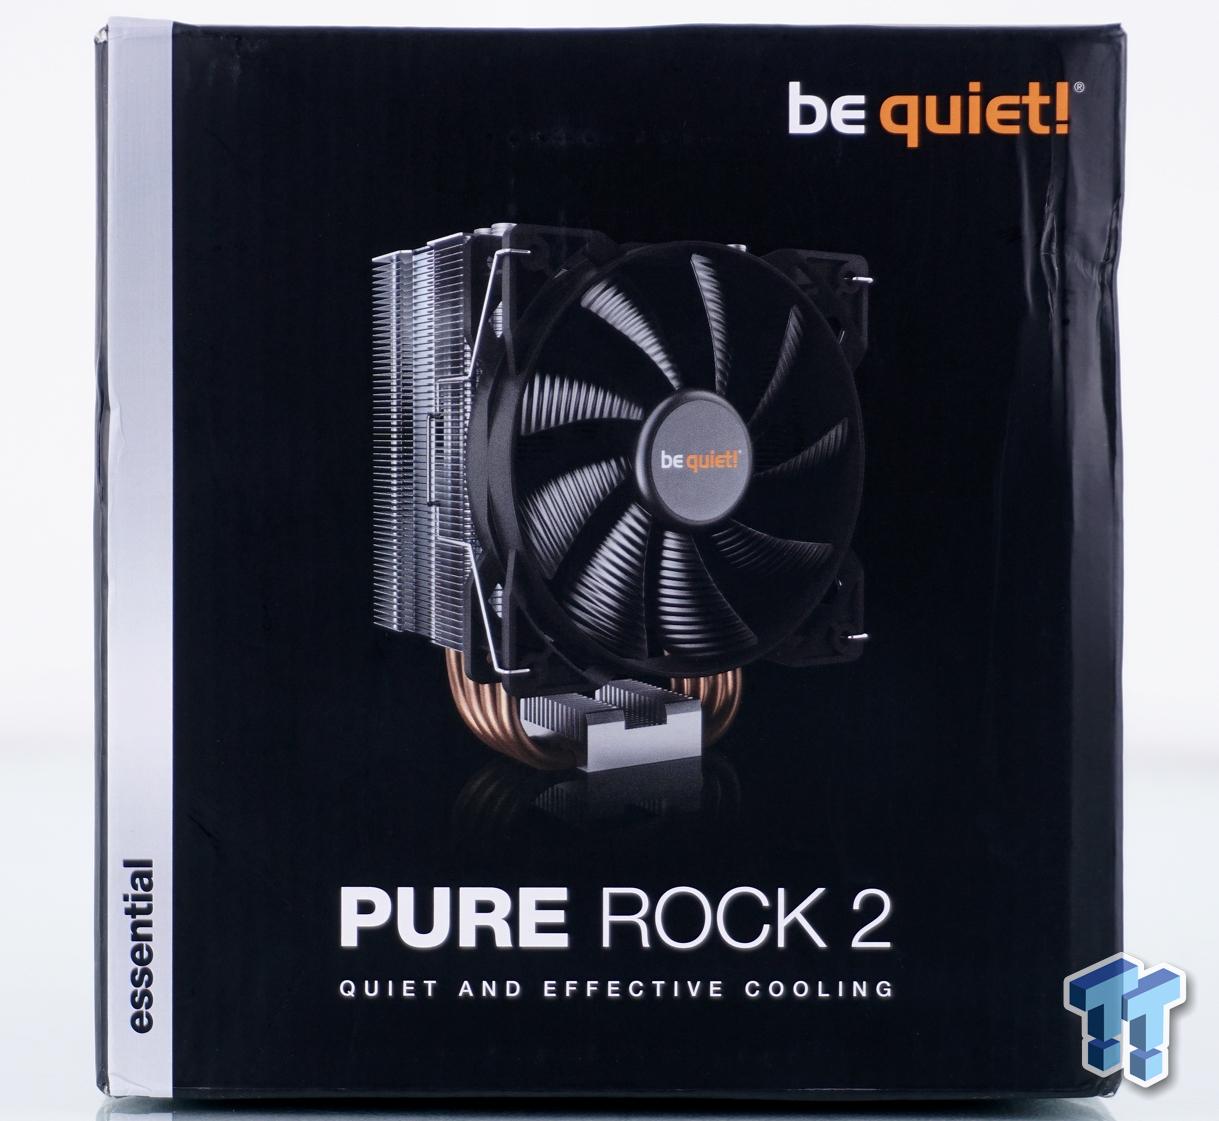 2 quiet! Review Rock Cooler be CPU Pure